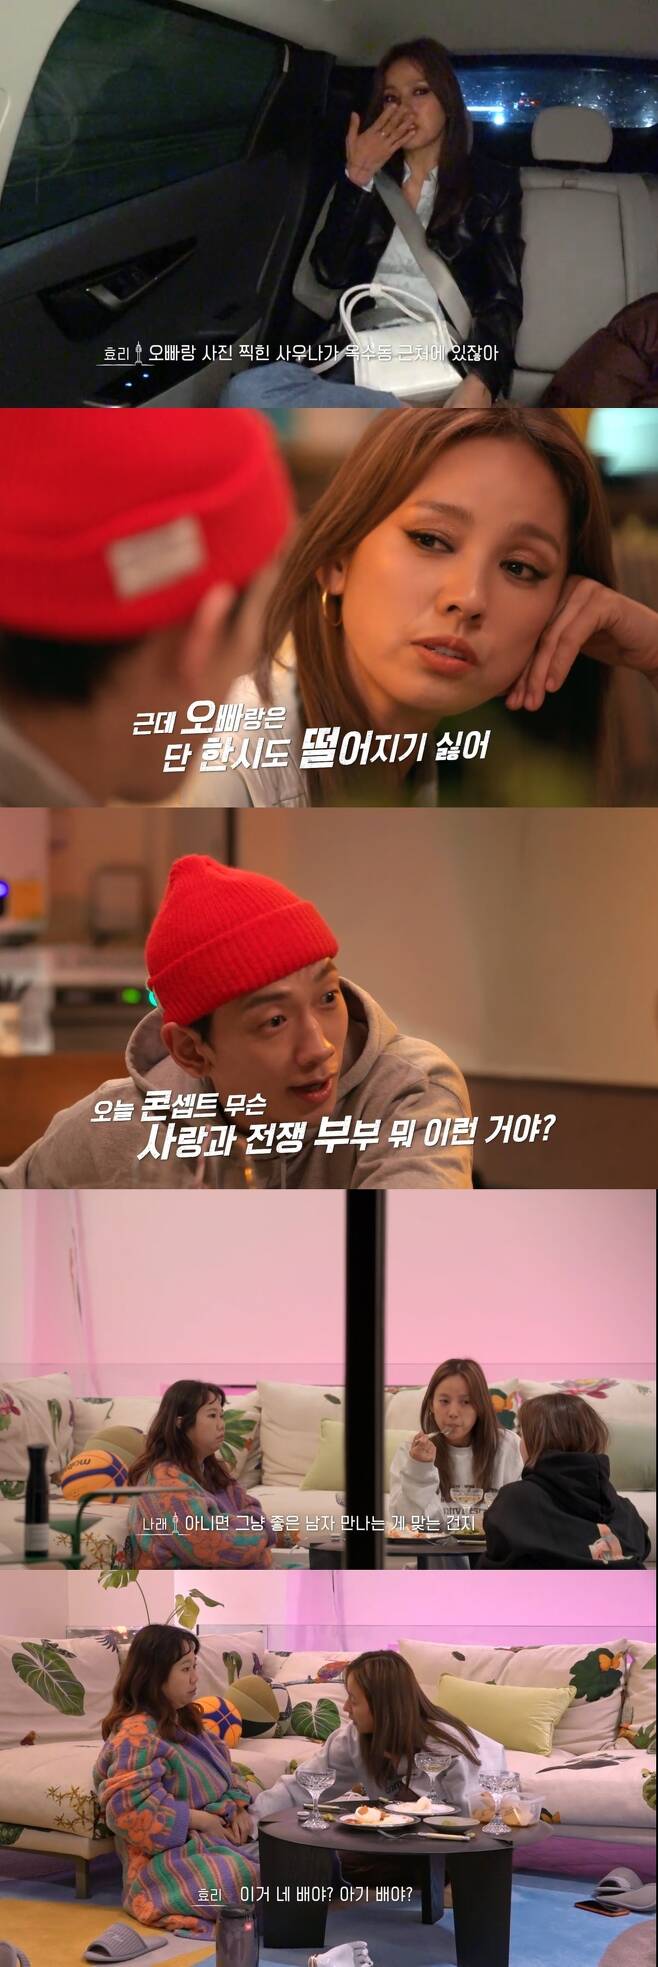 Lee Hyori talked about Lee Sang-soon and his wifes troubles, plans for the second year.Lee Hyori shared his thoughts on the second year from the troubles of Rain, Park Na-rae, and Hong Hyun-hee in the TV Seoul Check In released on April 8th.After the Seoul Check-in poster shoot, Lee Hyori moved in a car and watched the downtown scenery of Seoul.Lee Hyori said, Seoul is good, but there is not too much time. I have to come for a week.Passing through Oksu-dong, Lee Hyori recited Hannam-dong after Oksu-dong, and the manager asked, Didnt you live in your sister Hannam-dong?I have a sauna with my brother (Lee Sang-soon) near Oksu-dong, when it was good.When I first dated, he recalled his days of devotion with Lee Sang-soon.After a moment of memories, Lee Hyori, who suddenly thought of her husband, immediately called Lee Sang-soon.Lee Sang-soon responded to the Lee Hyori prank, Dont look for me, with a sly response, saying, Im going to cry.Soon after, Lee Hyori, who found the bar in Itaewon, found the DJing equipment while watching the bar and immediately recalled Lee Sang-soon.Lee Hyori told the bartender, My husband DJs too, and when asked what music he does, he replied, Deep techno.Lee Hyori continued to talk to the bartender.I lived in Seoul Hannam-dong, but I lived in Jeju Island, he said.  (I went to Jeju Island) and I changed a lot in eight years, he said. When I was in Seoul, I was too busy working and did not enjoy Seoul.I do not know Seoul now.. He said why he did not enjoy Seoul.A man approached Lee Hyori, who enjoyed cocktails and music alone; the man was Singer and actor Bee (Jung Ji-hoon).When Lee Hyori texted, Rain came running straight into the room in his comfortable clothes. Rain said, Sang Soon called me.While talking to Rain, Lee Hyori asked the question between Rain and Kim Tae-hee, saying, Are you still good?We started dating for 10 years, Rain said. It was so beautiful when we ate.When I eat rice, I see a face filled with sheep balls (it was pretty), he boasted an unchanging affection.Lee Hyori said, I really love you. I envy you. I really think I have everything. Is not the babies too beautifully big?I am grateful and happy, but my brother is like a mother. I take care of him too well. He is sweet and too best friend. I do not know.Whether it is only us or everyone else ... he said.The idea of being too close to him suggested a new atmosphere, a new feeling, but Lee Hyori said, But I do not want to fall with my brother for a moment.We kiss and were all in a hurry, he said, refusing, but were not so sure about the couple.I am annoyed by my child, he said. What is the concept of todays concept and what is the love and war couple?Lee Hyori, who met Park Na-rae and moved to Park Na-raes house, continued the conversation with Hong Hyun-hee and three of them.Park Na-rae said, When my sister got married, I asked her about her age. She was 36. I thought she was working and a long time later.So I was a little surprised, he said.Park Na-rae, 38, was still struggling between work and marriage, saying that marriage seemed early.Park Na-rae, who said, I want to see a good man, whether it is right to pursue work, said, I am burdened to come to marriage even if I meet a man at age.Lee Hyori said, If you get married, you can not work. You can work even if you get married.Lee Hyori asked Hong Hyun-hee to be able to touch the boat carefully. Hong Hyun-hee, who recently reported the pregnancy, said, Is the couple good?When Hong Hyun-hee asked, Do you have a pregnancy plan? Lee Hyori said, But it does not burn.Hong Hyun-hee presented Lee Hyori with pomegranate nutrients, saying that he was eating.